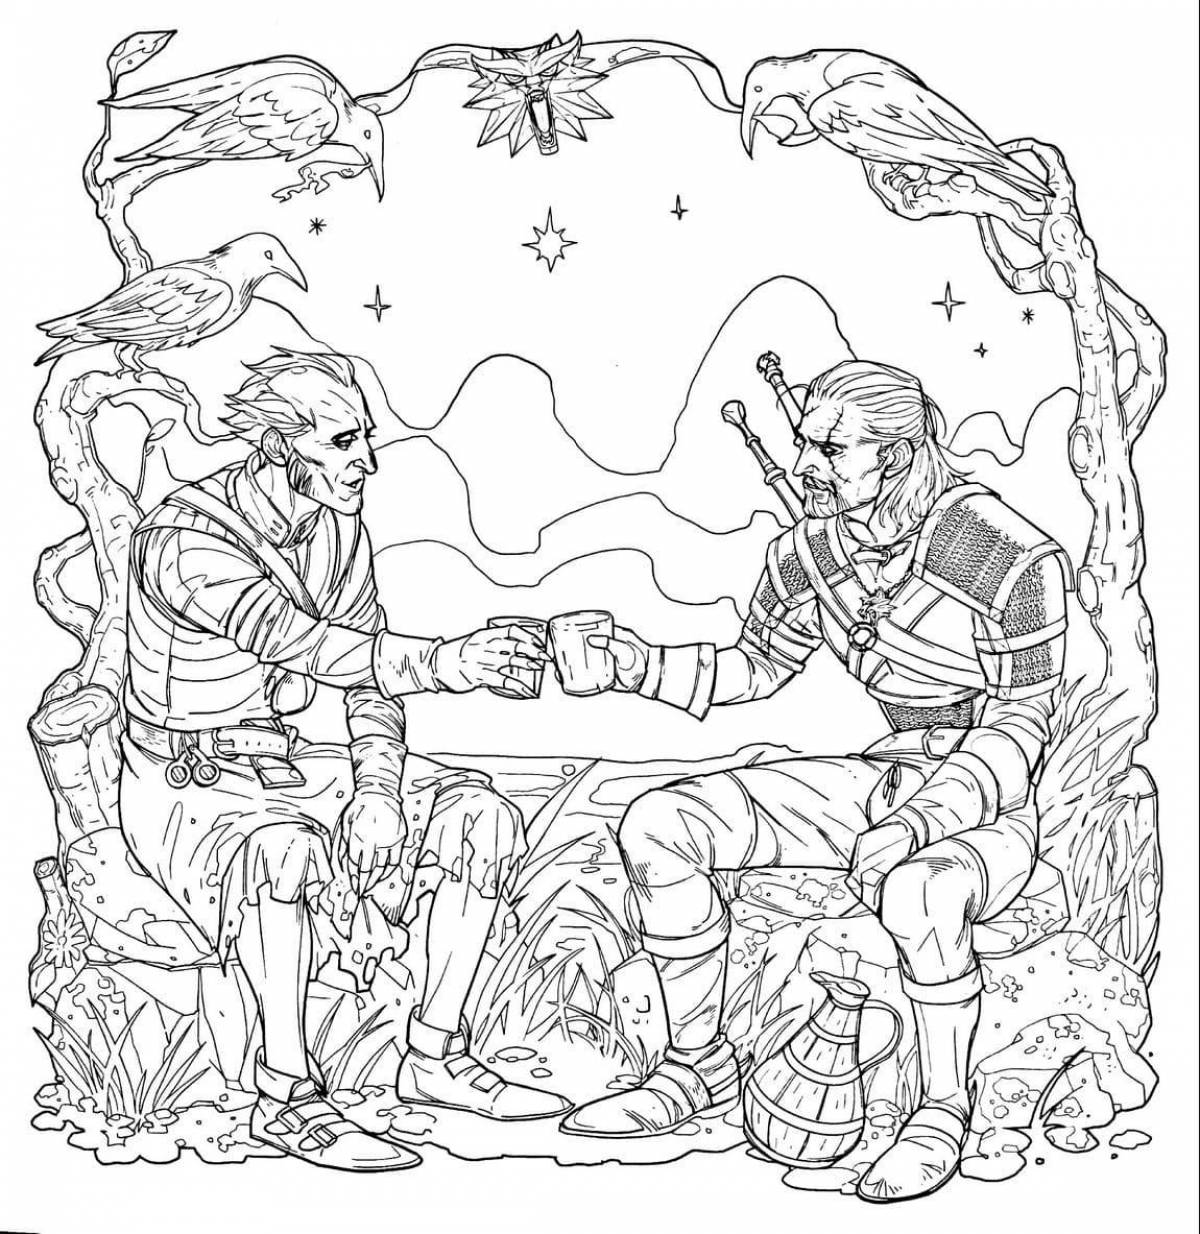 Magnificent witcher coloring book